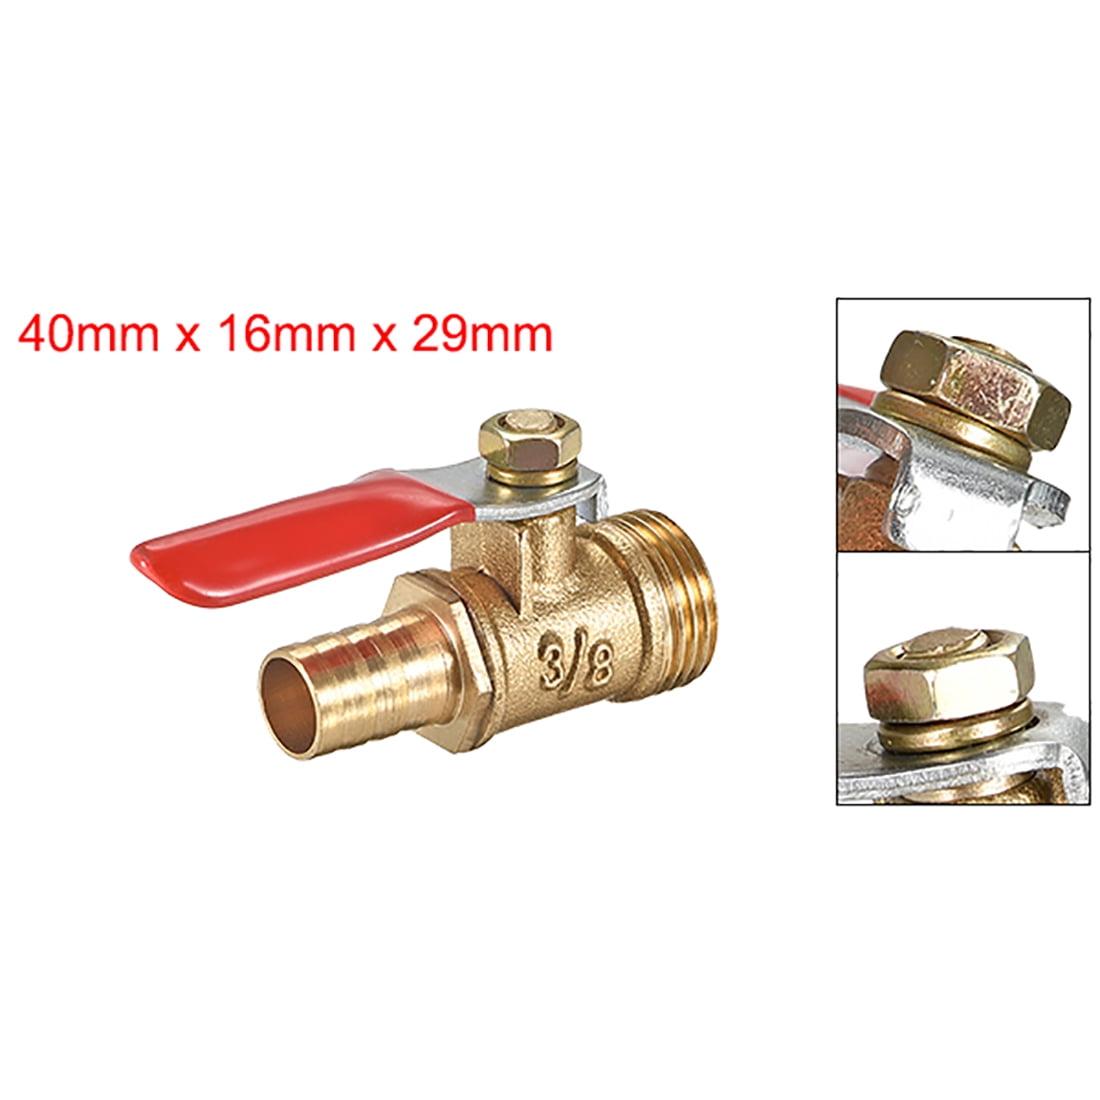 Metaland Brass 3 Way Shut-Off Valve 1/2 Hose Barb 2 Switch Y Shaped Ball Valve Water/Fuel/Air